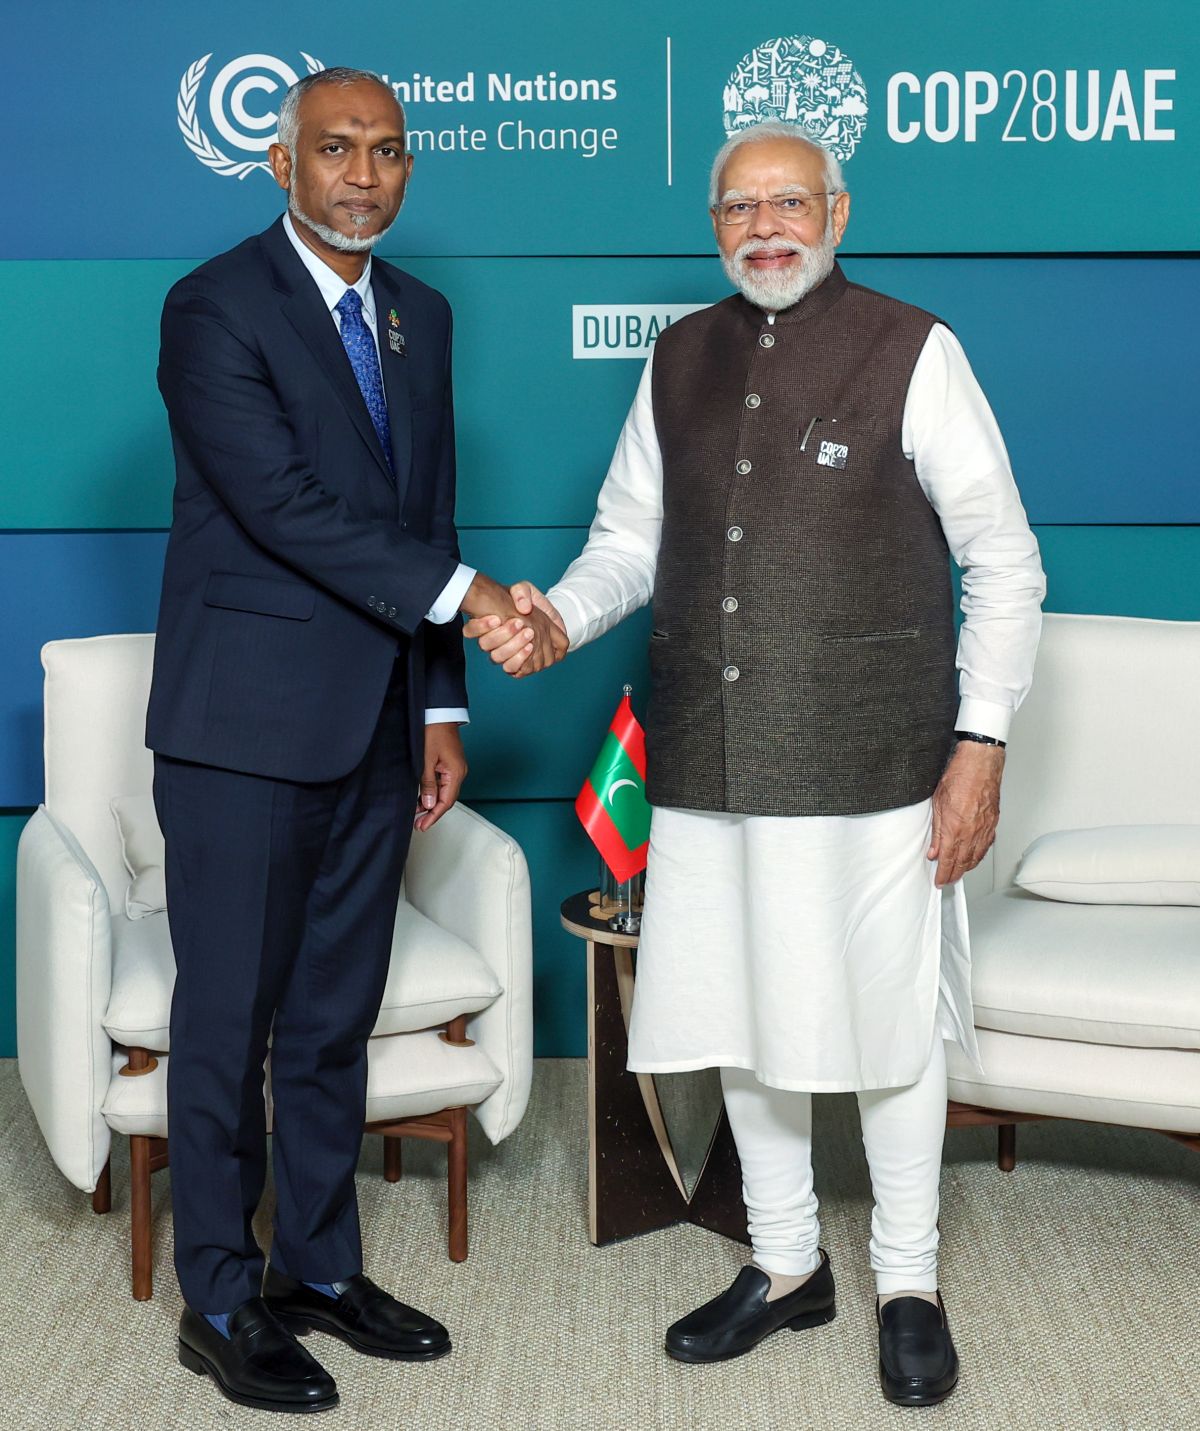 More Indian troops to leave Maldives this month: Prez